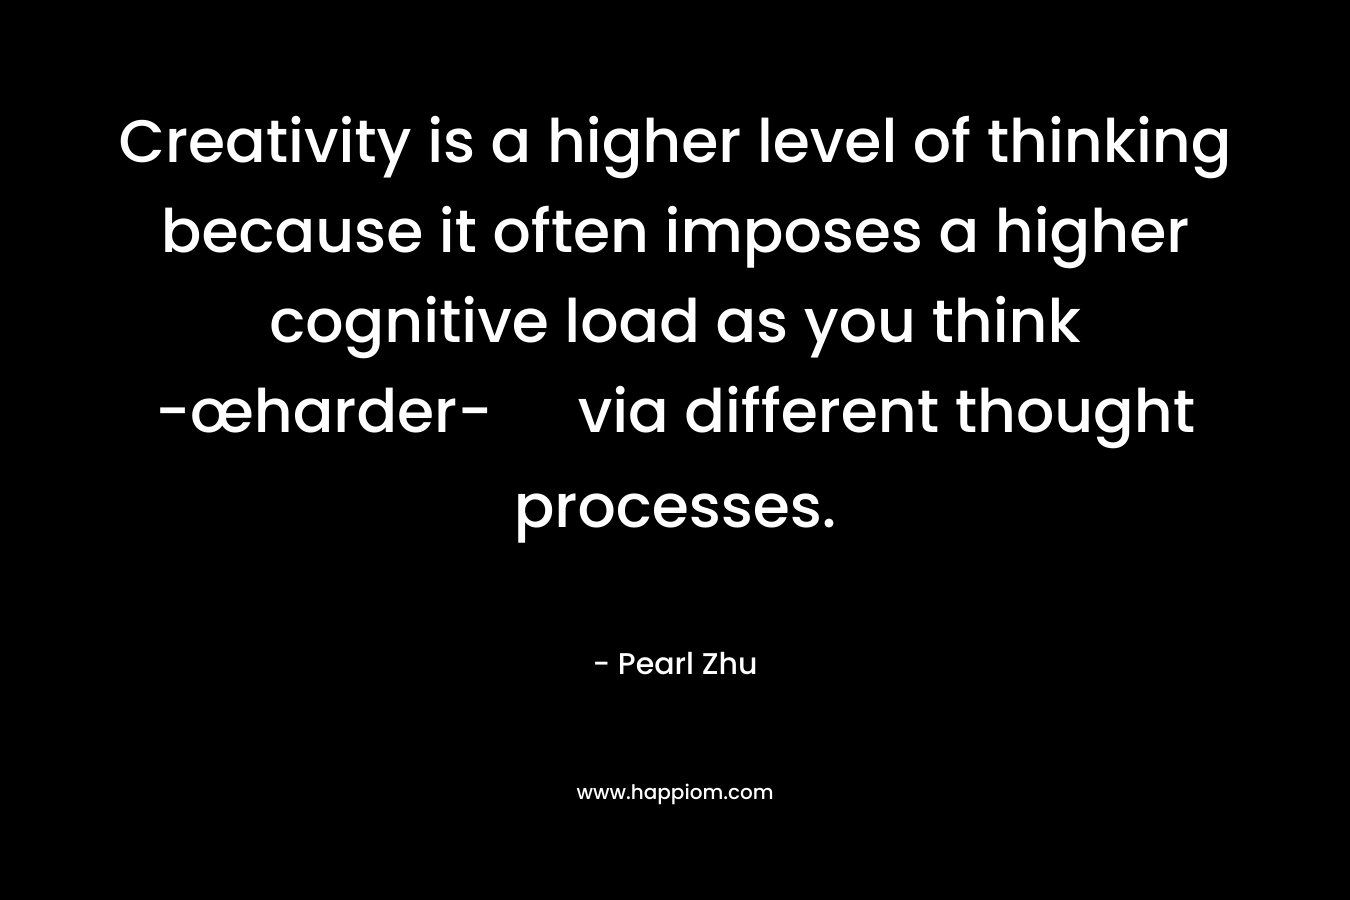 Creativity is a higher level of thinking because it often imposes a higher cognitive load as you think -œharder- via different thought processes. – Pearl Zhu